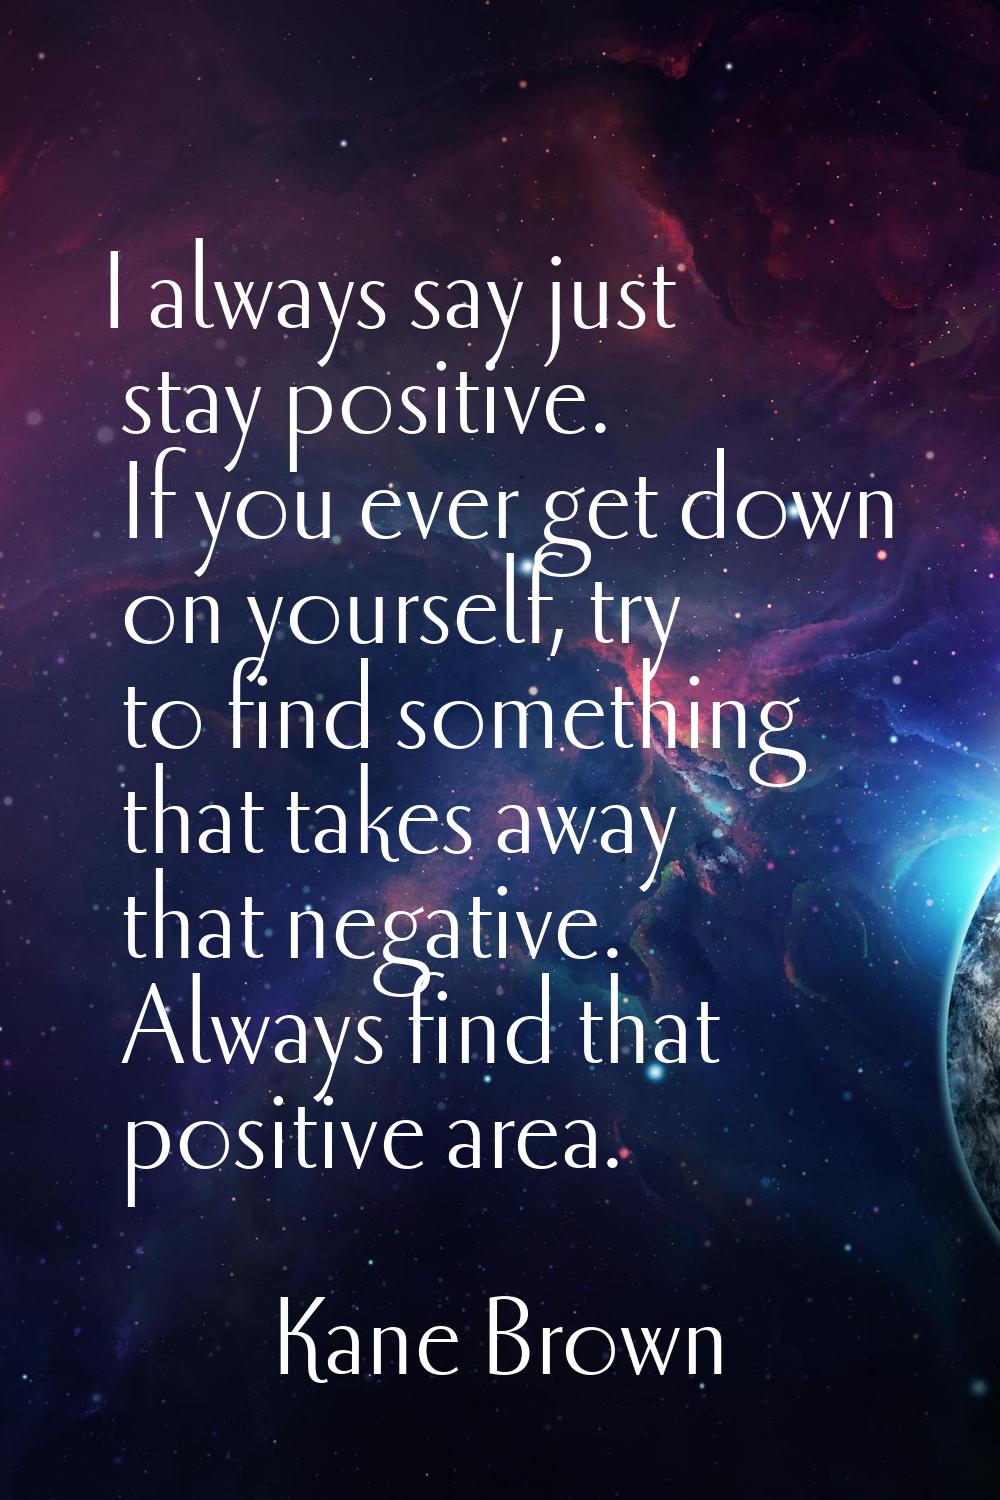 I always say just stay positive. If you ever get down on yourself, try to find something that takes